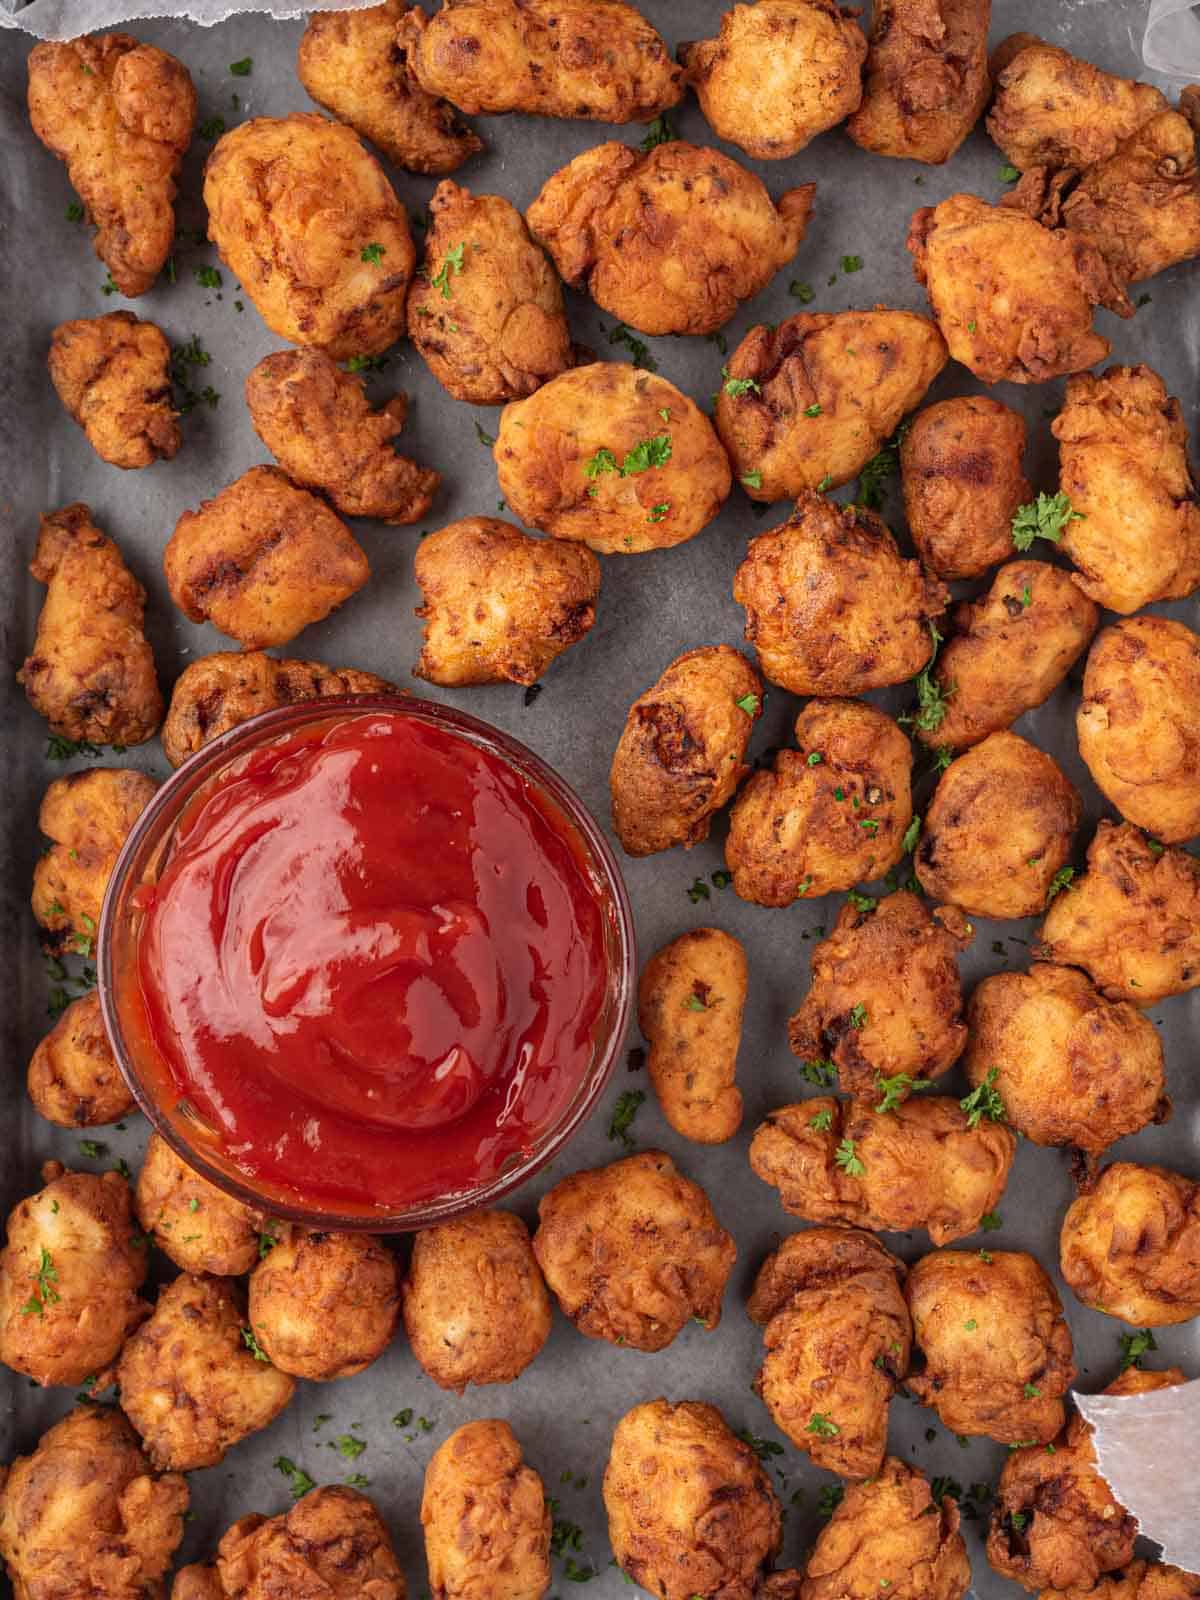 A tray full of homemade popcorn chicken and a bowl of dipping sauce.